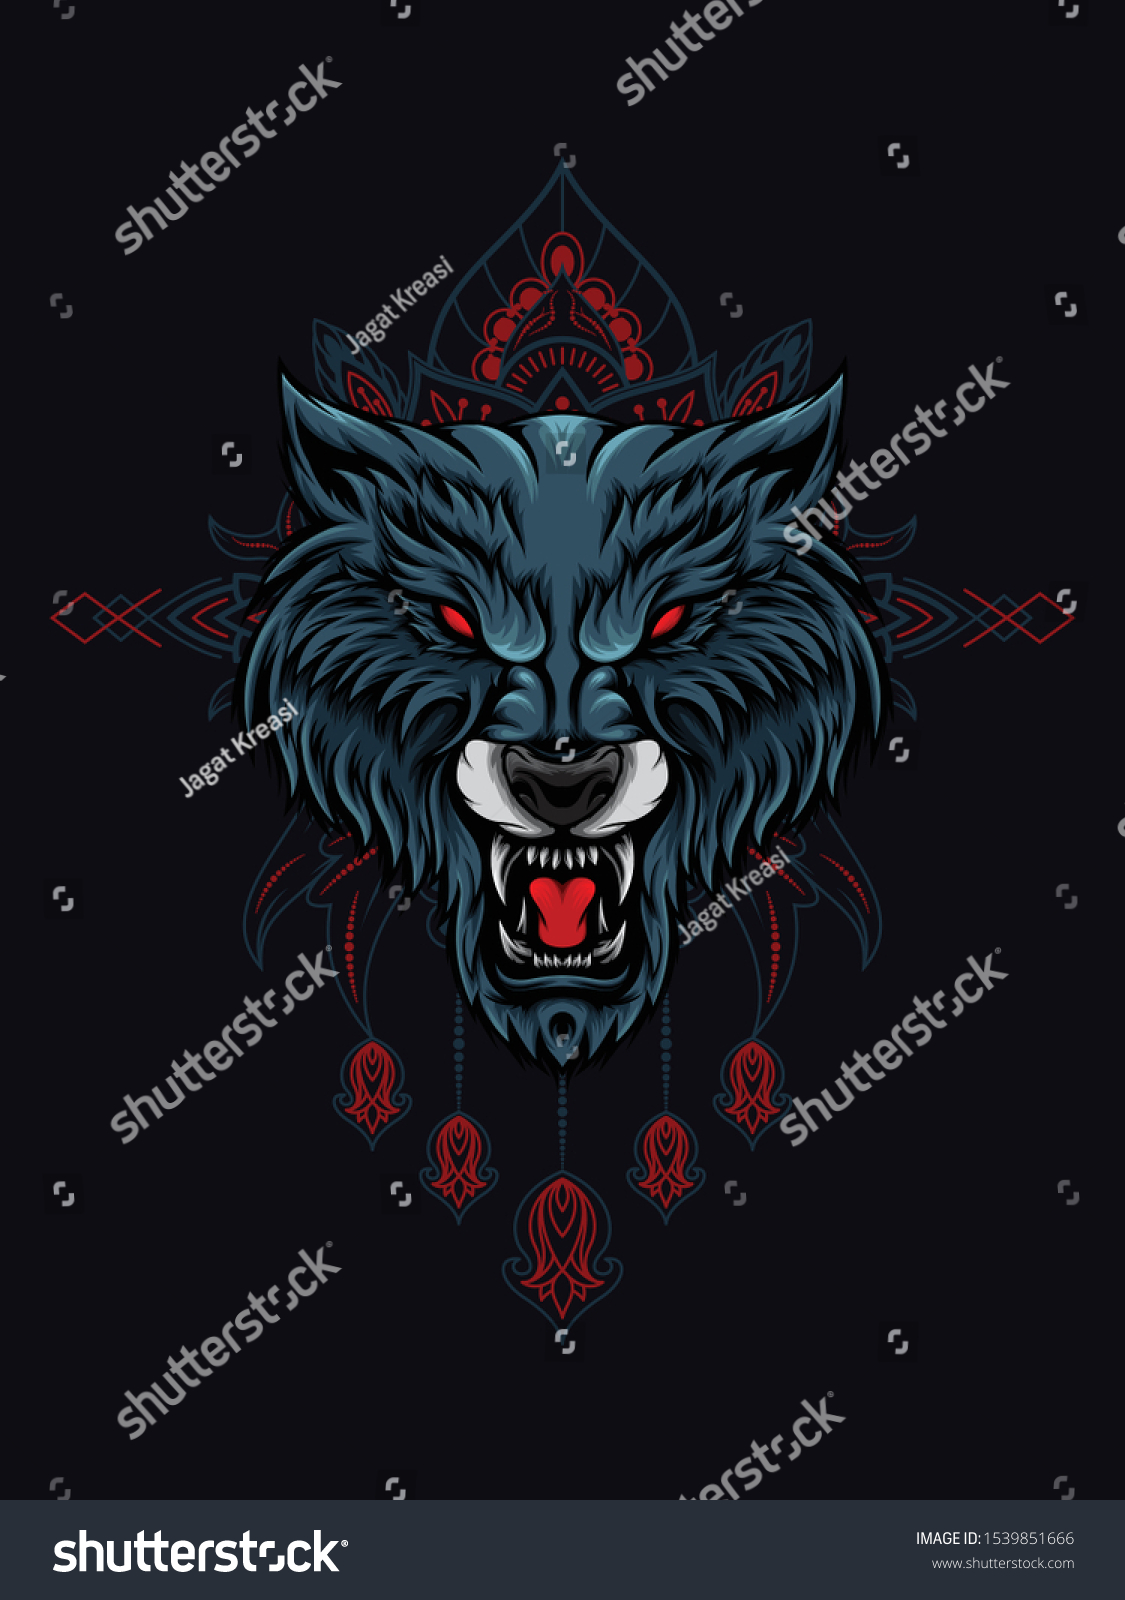 SVG of Wolf head vector illustration with mandala as the background ornament, suitable for apparel merchandise, t-shirt or outerwear. svg